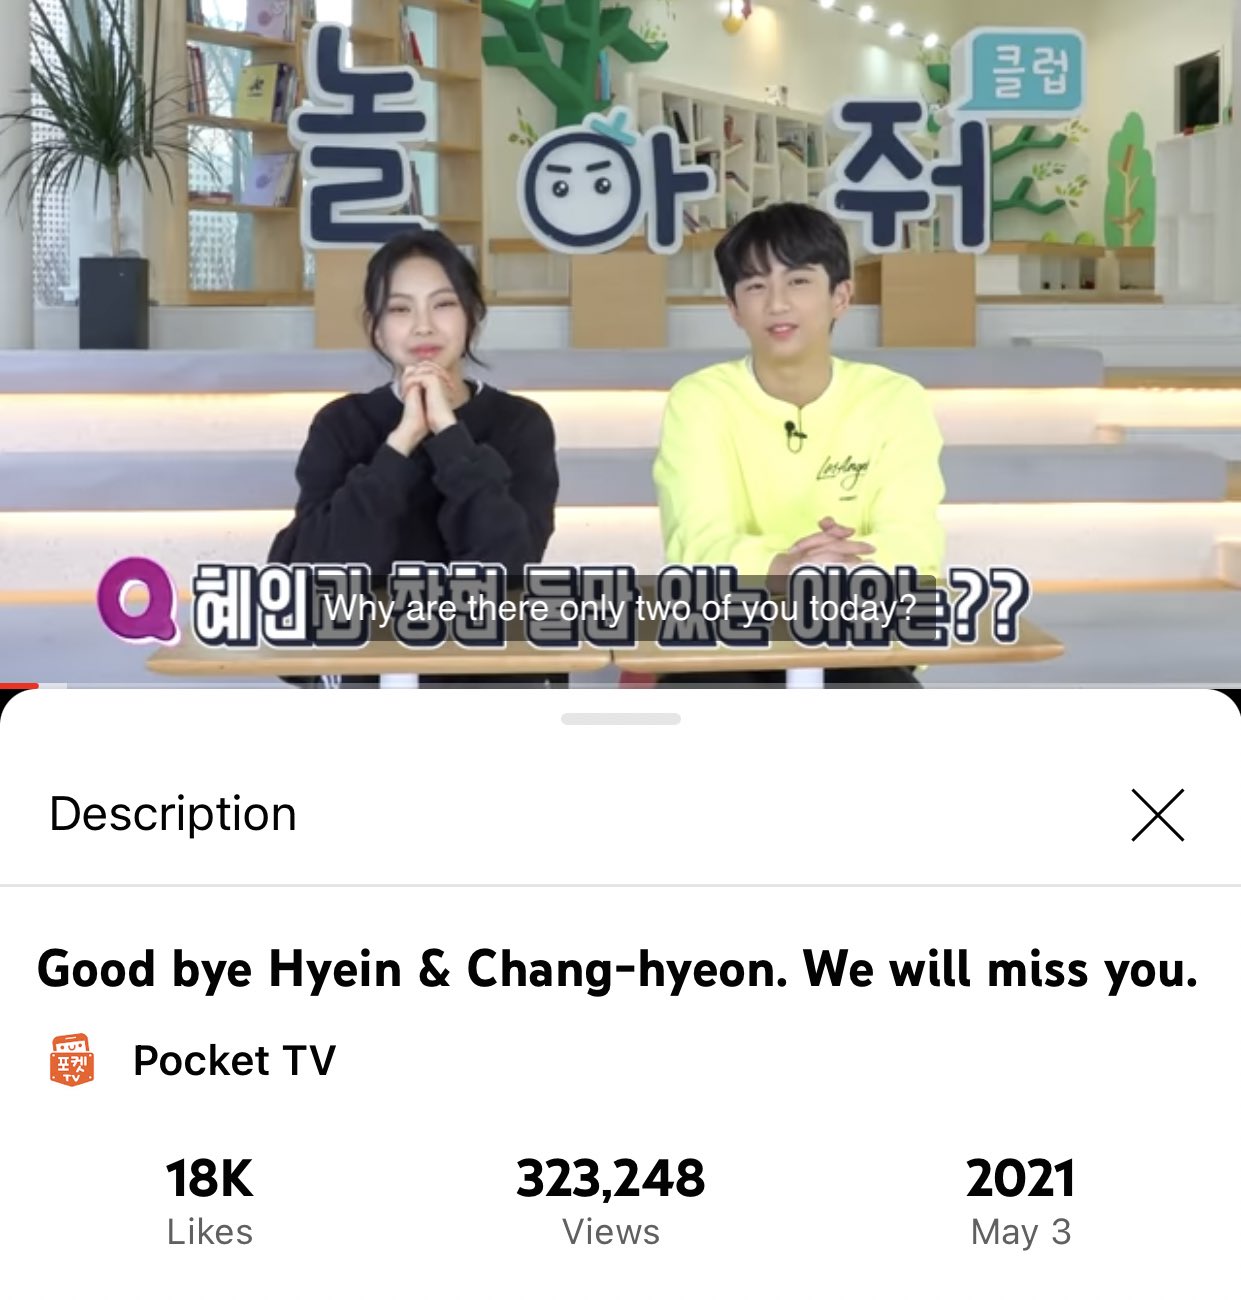 lily 🌸 on X: hyein left play with me club on the 3rd of may 2021